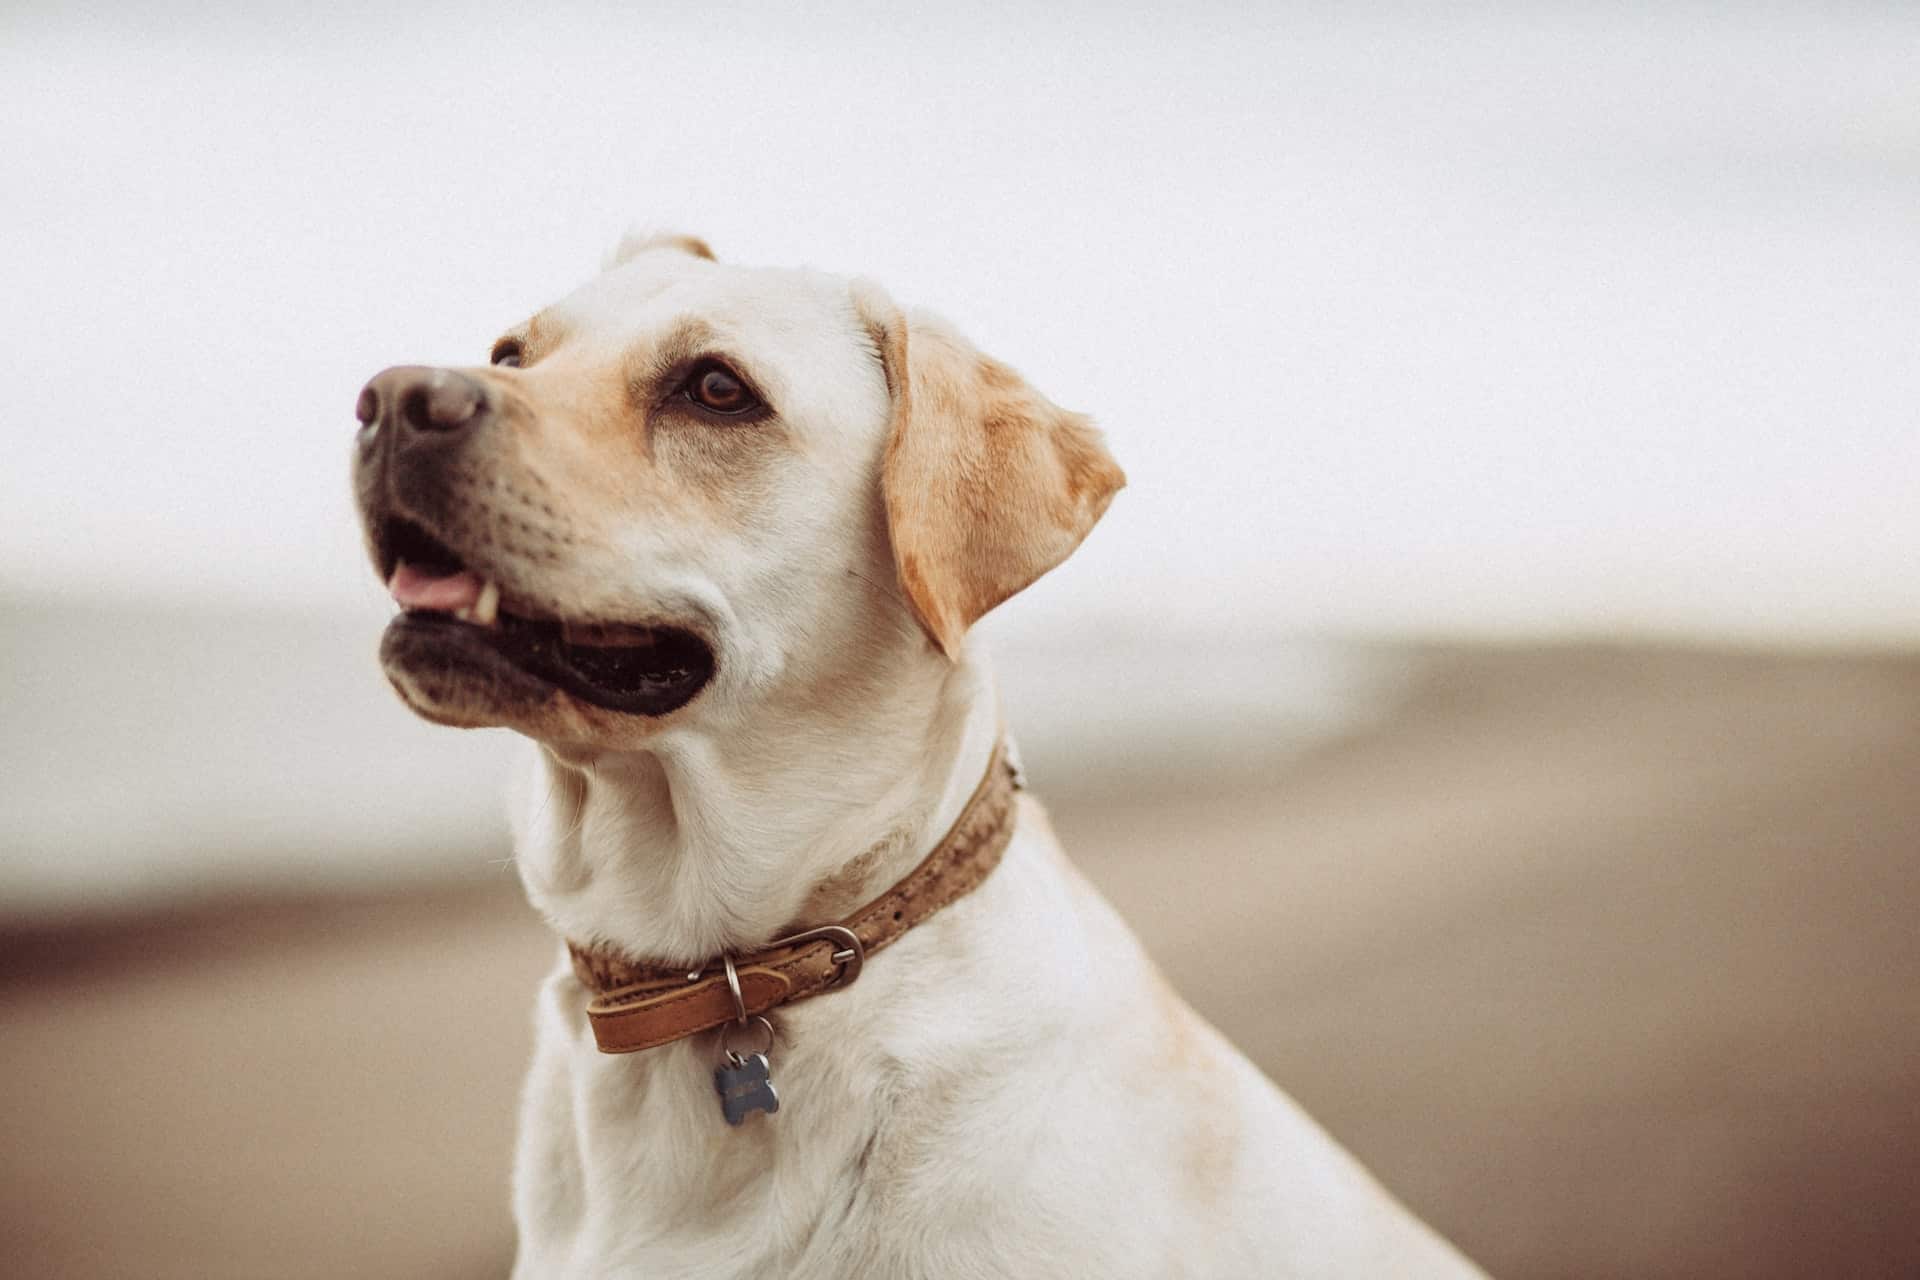 What can a smart dog collar do?